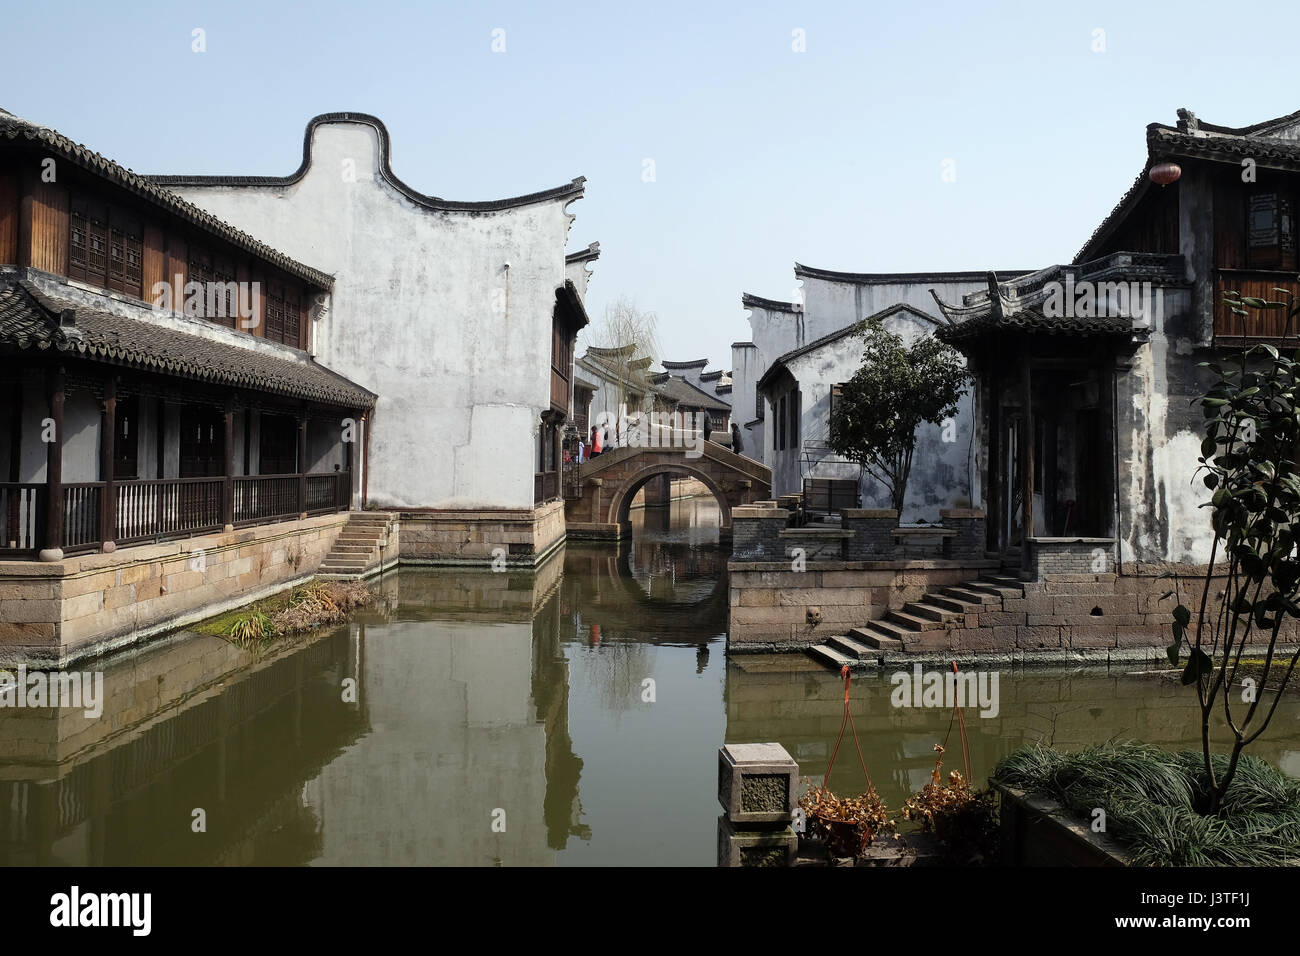 Traditionelle Häuser entlang des Canal Grande, alte Stadt von Yuehe in Jiaxing, Zhejiang Provinz, China, 20. Februar 2016. Stockfoto